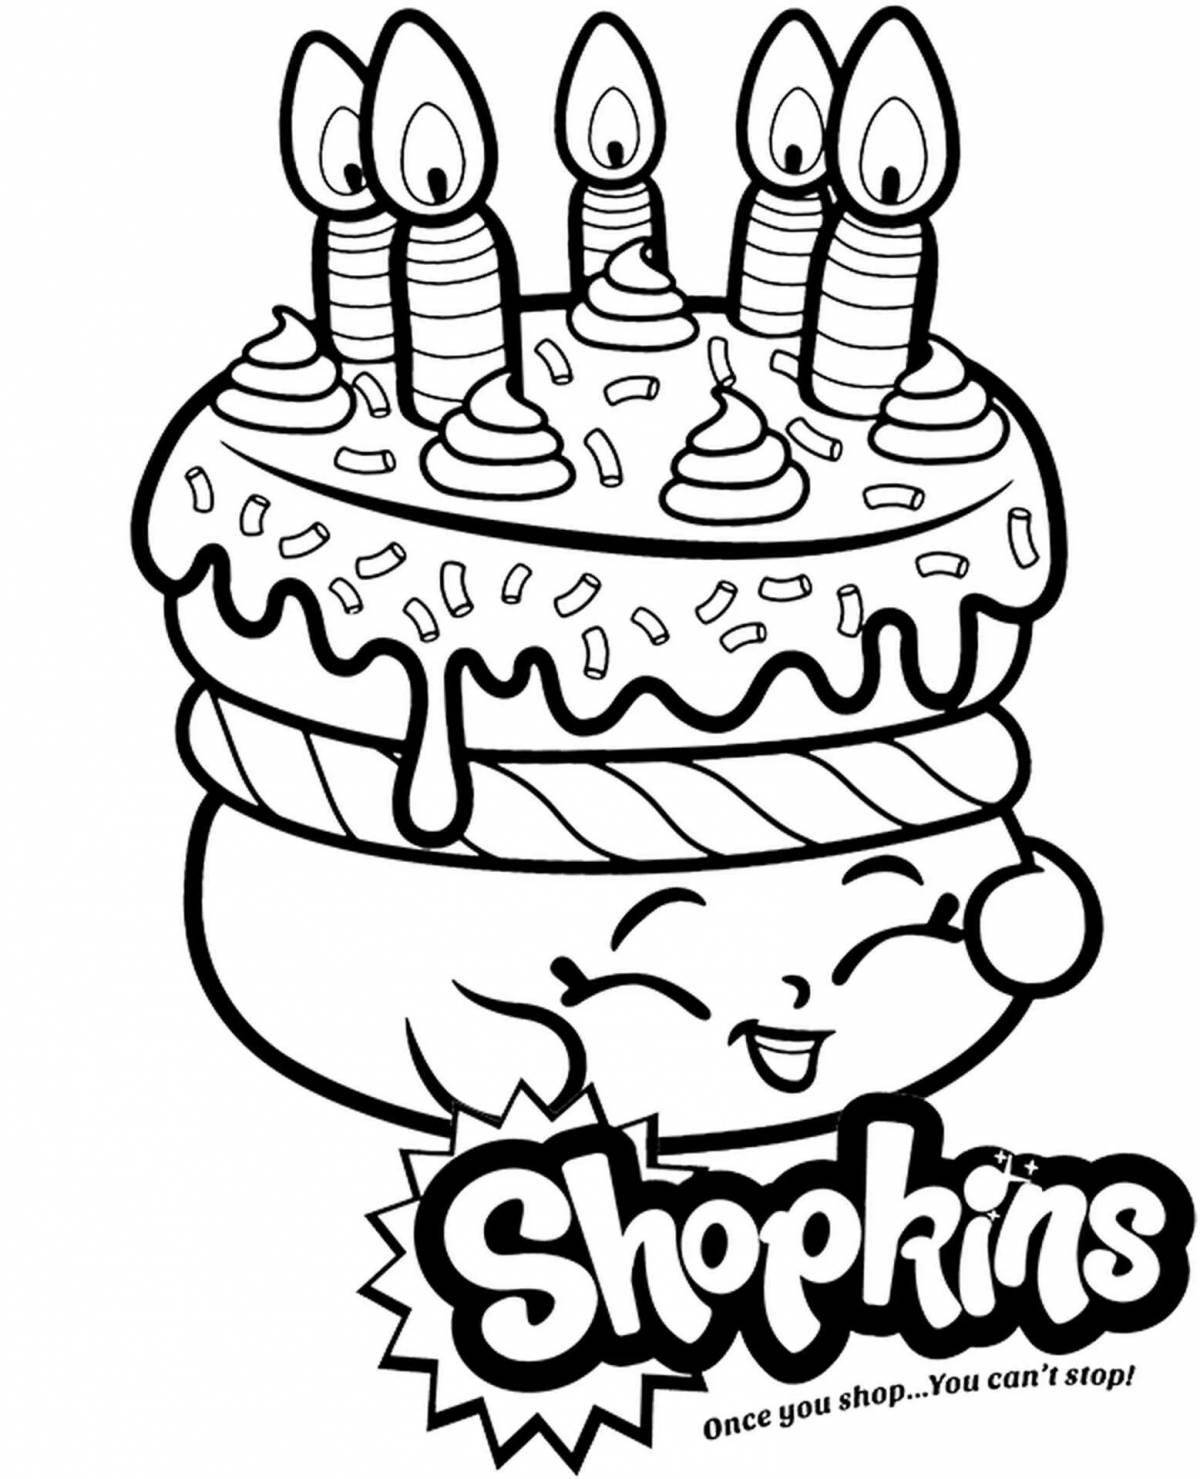 Color dynamic cake coloring page